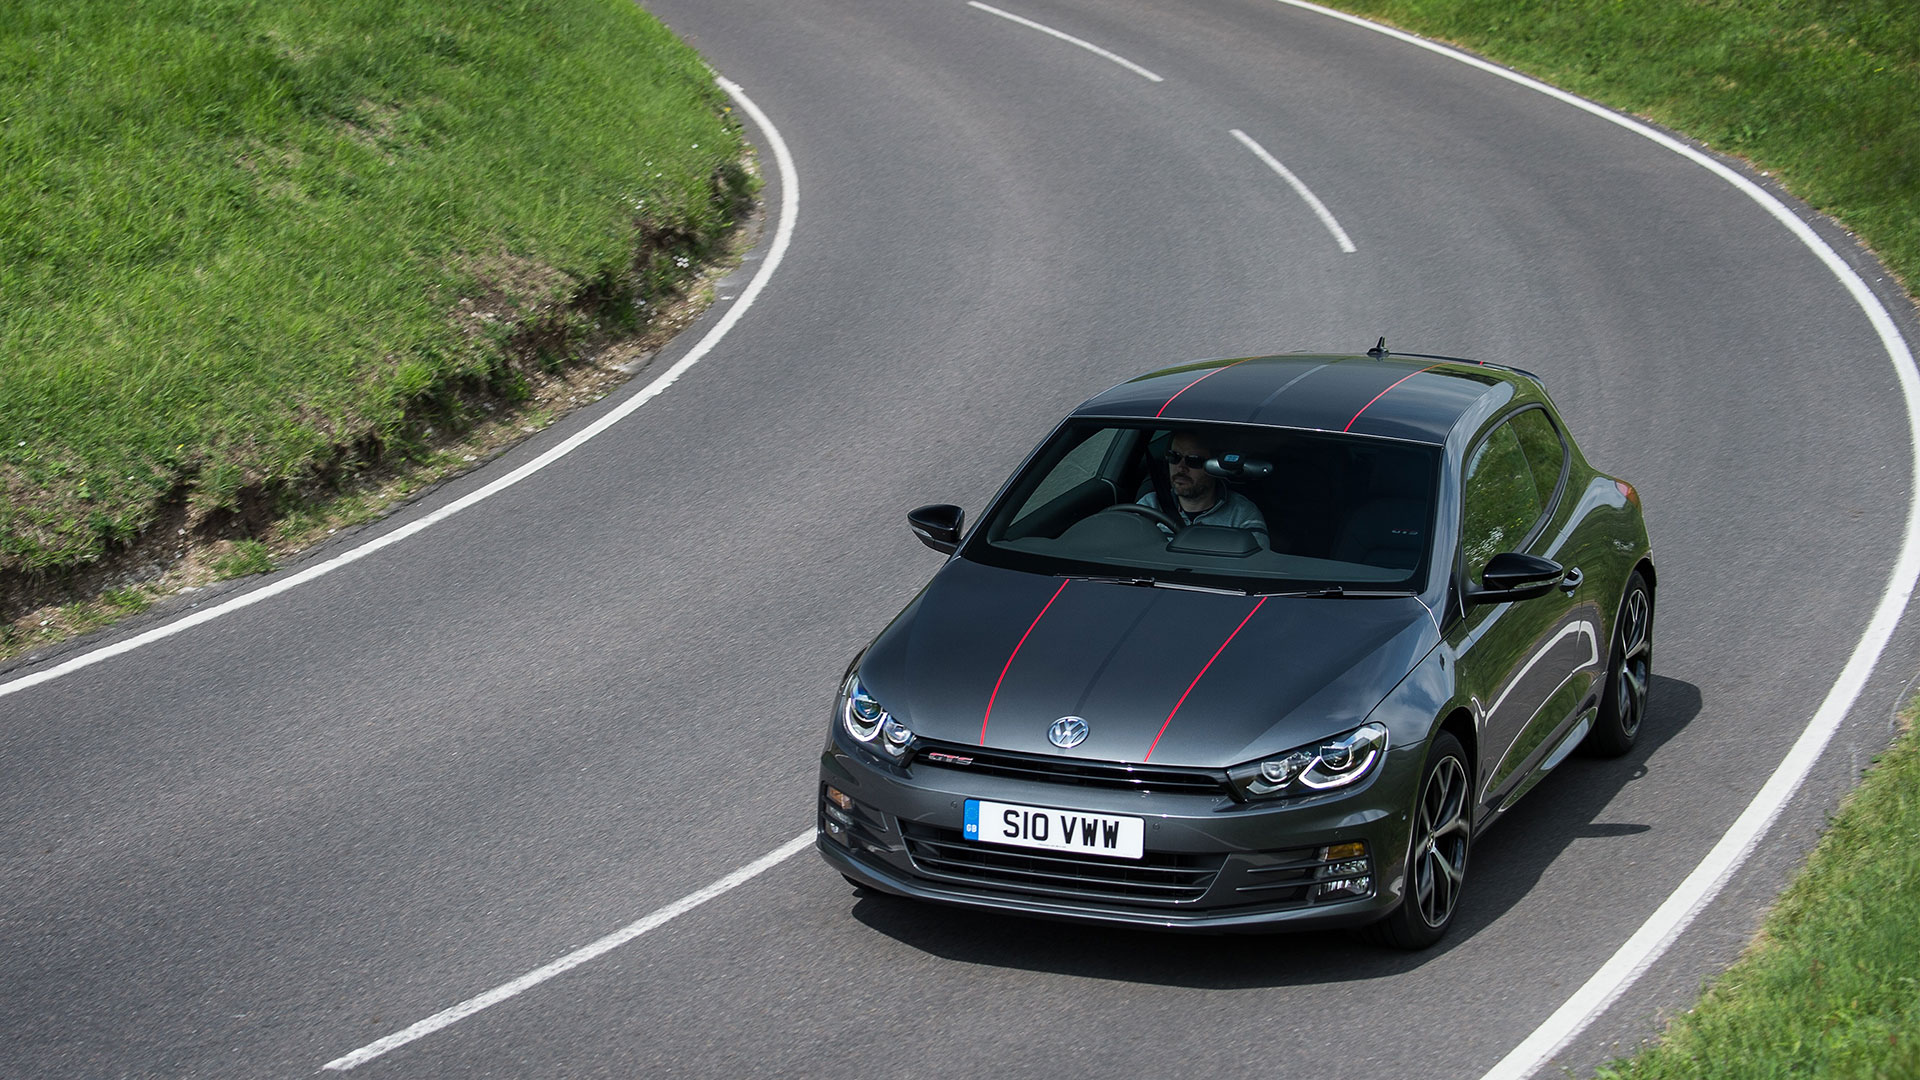 Black Volkswagen Scirocco used cars for sale on Auto Trader UK